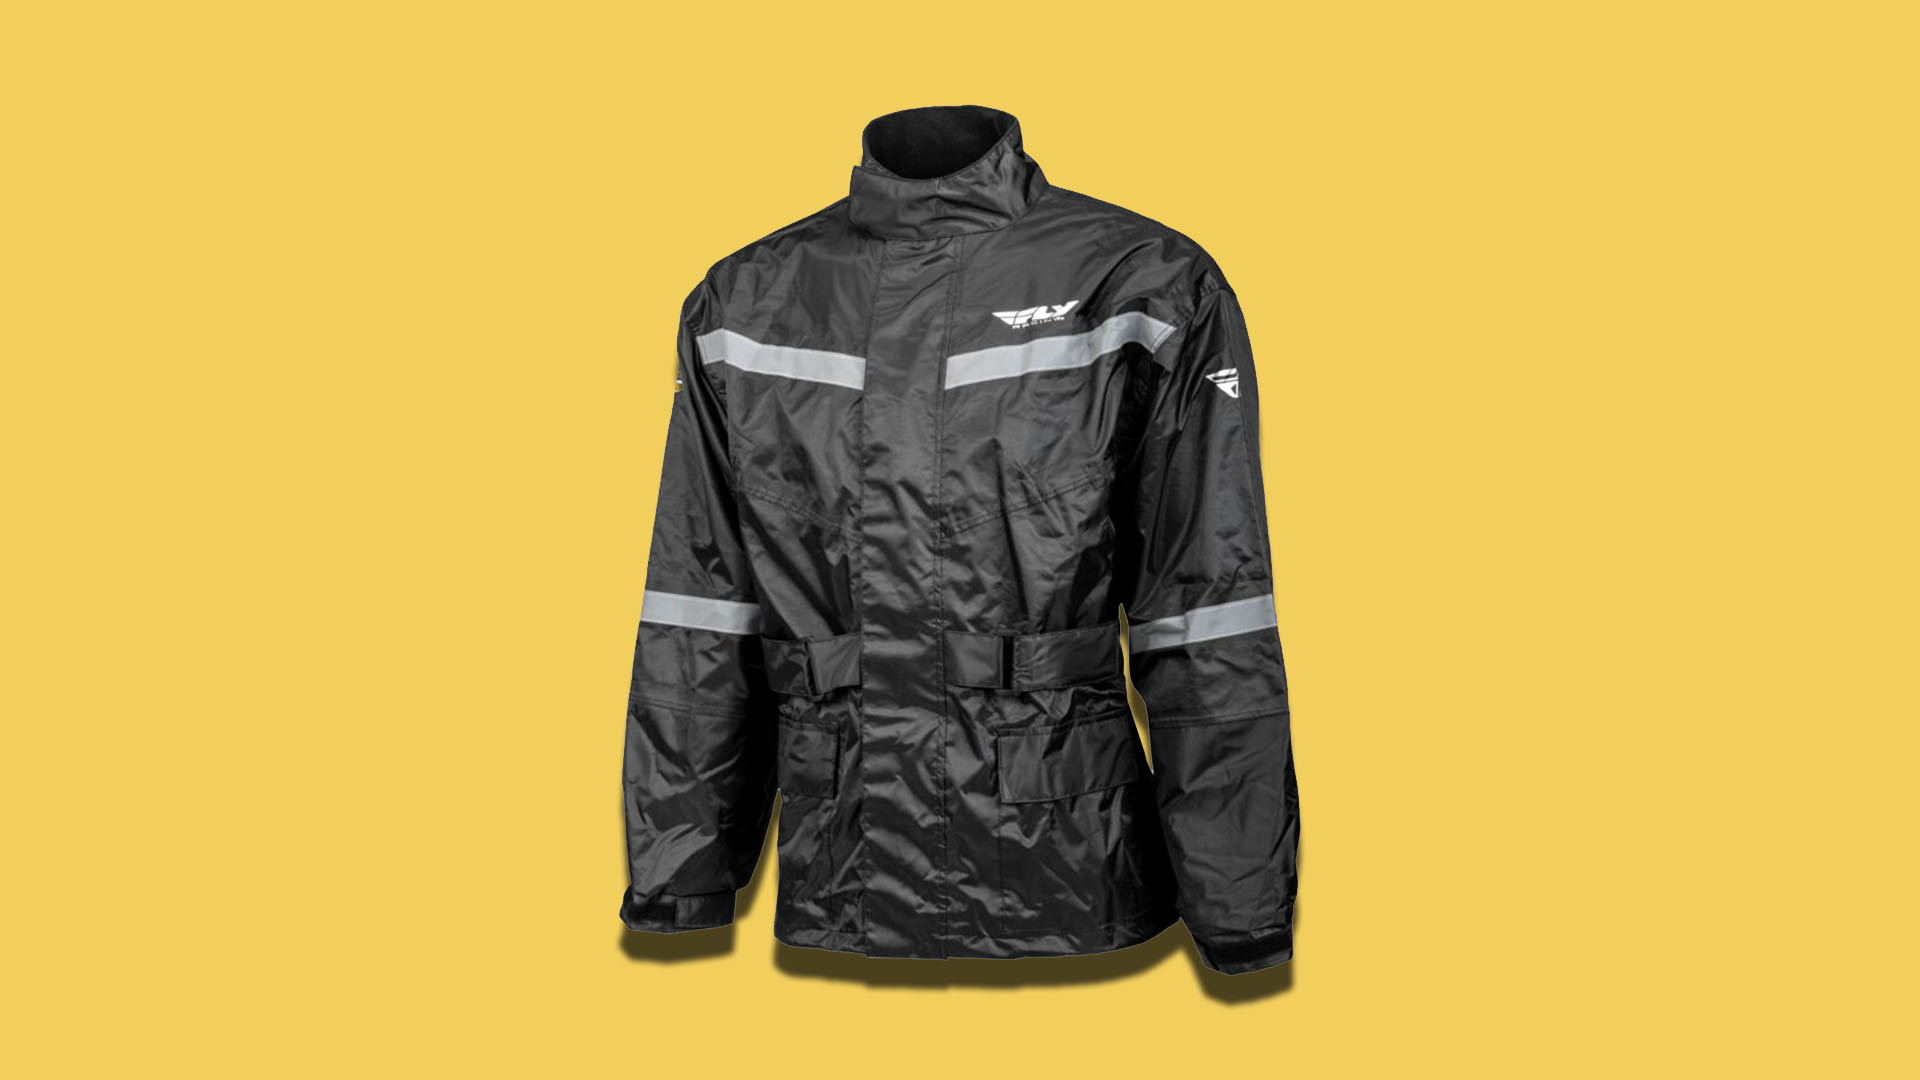 Best Motorcycle Rain Gear Reviews and Buying Guide